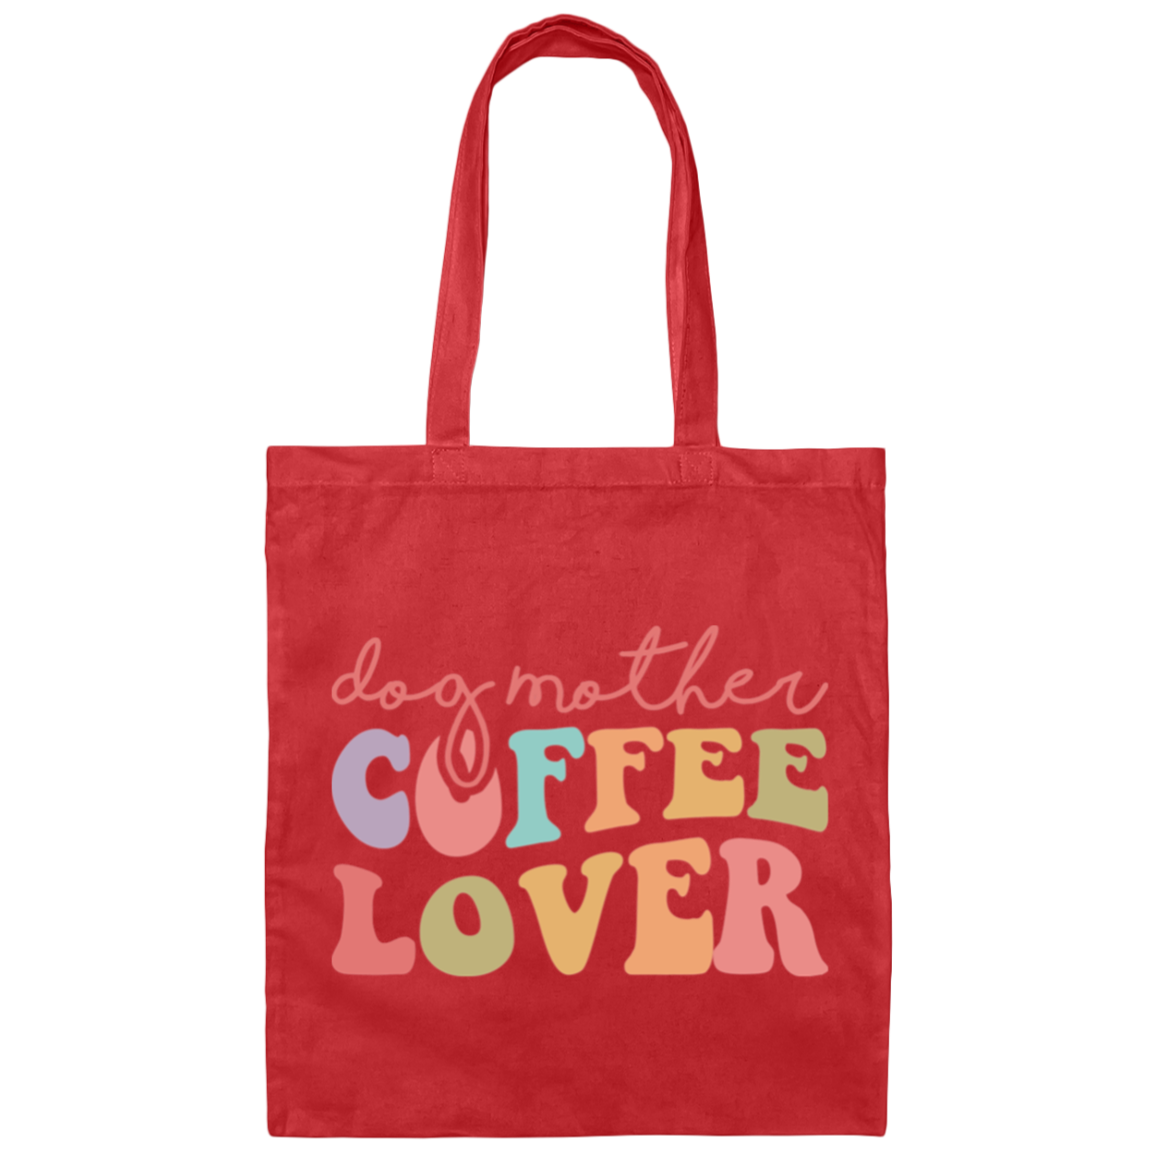 Dog Mother Coffee Lover Rescue Canvas Tote Bag